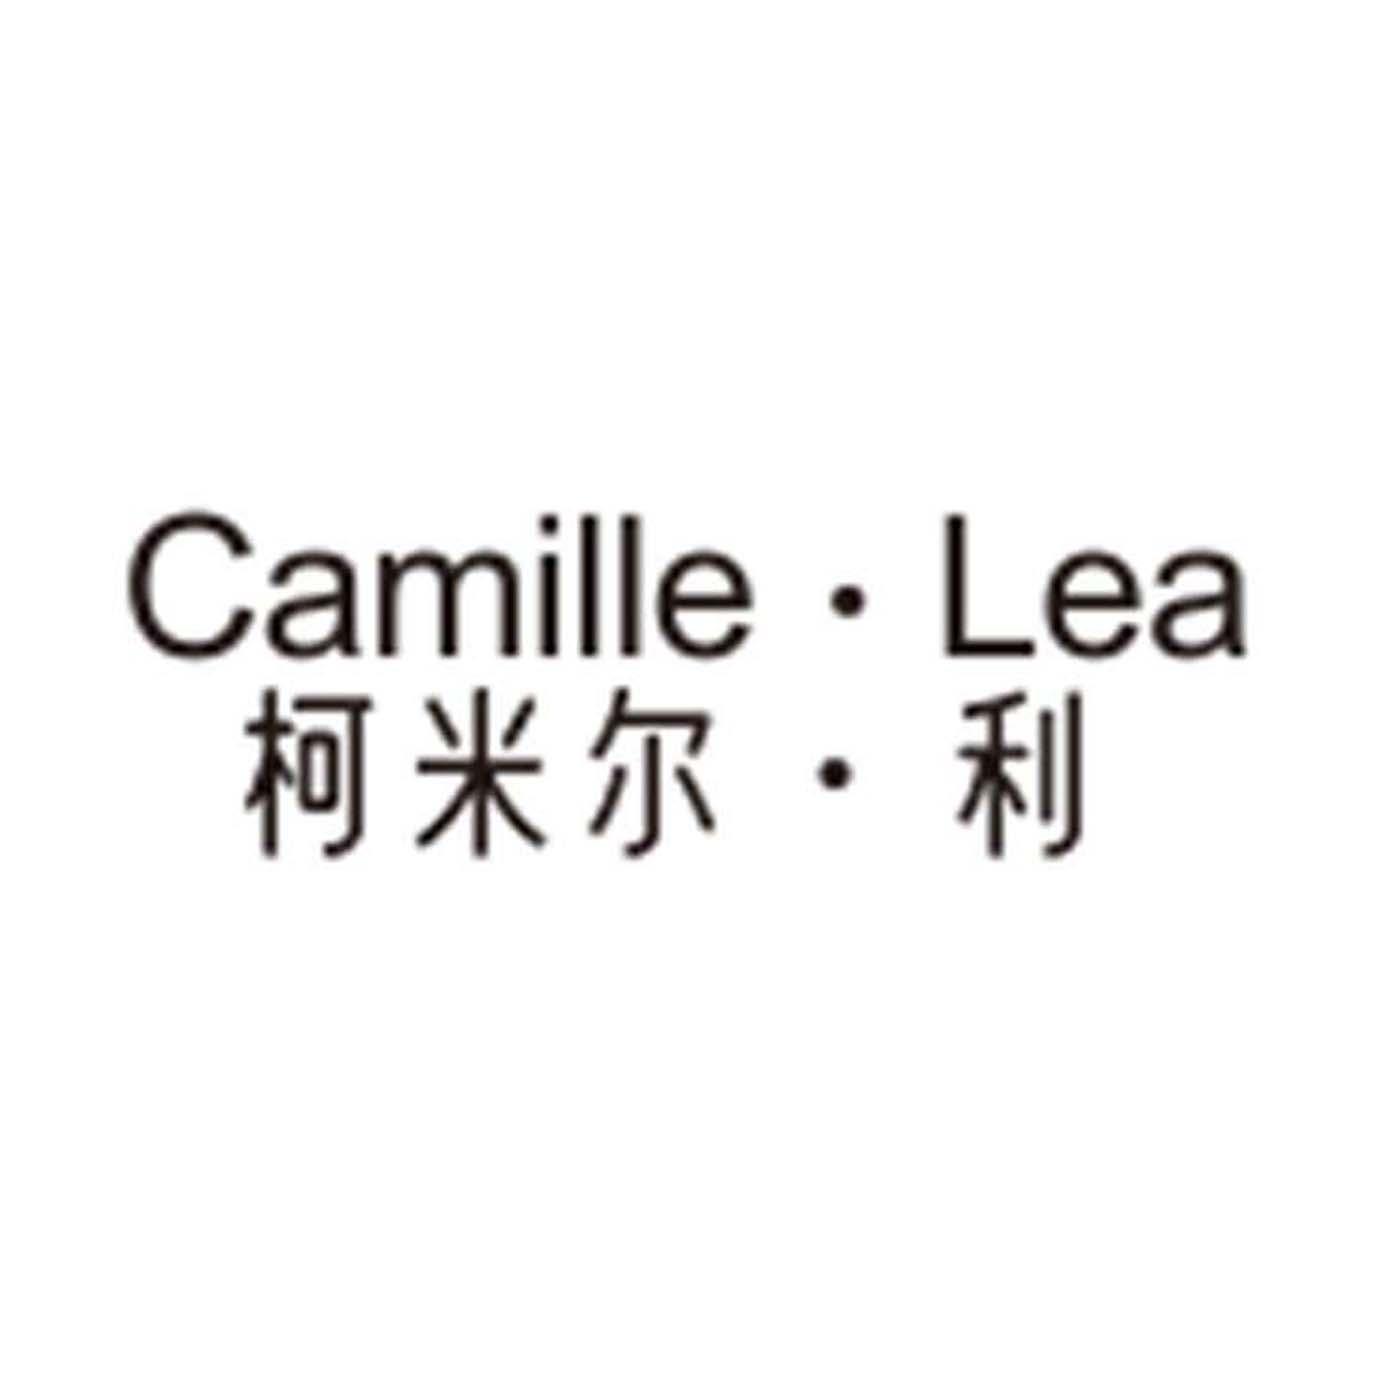 CAMILLE·LEA 柯米尔·利